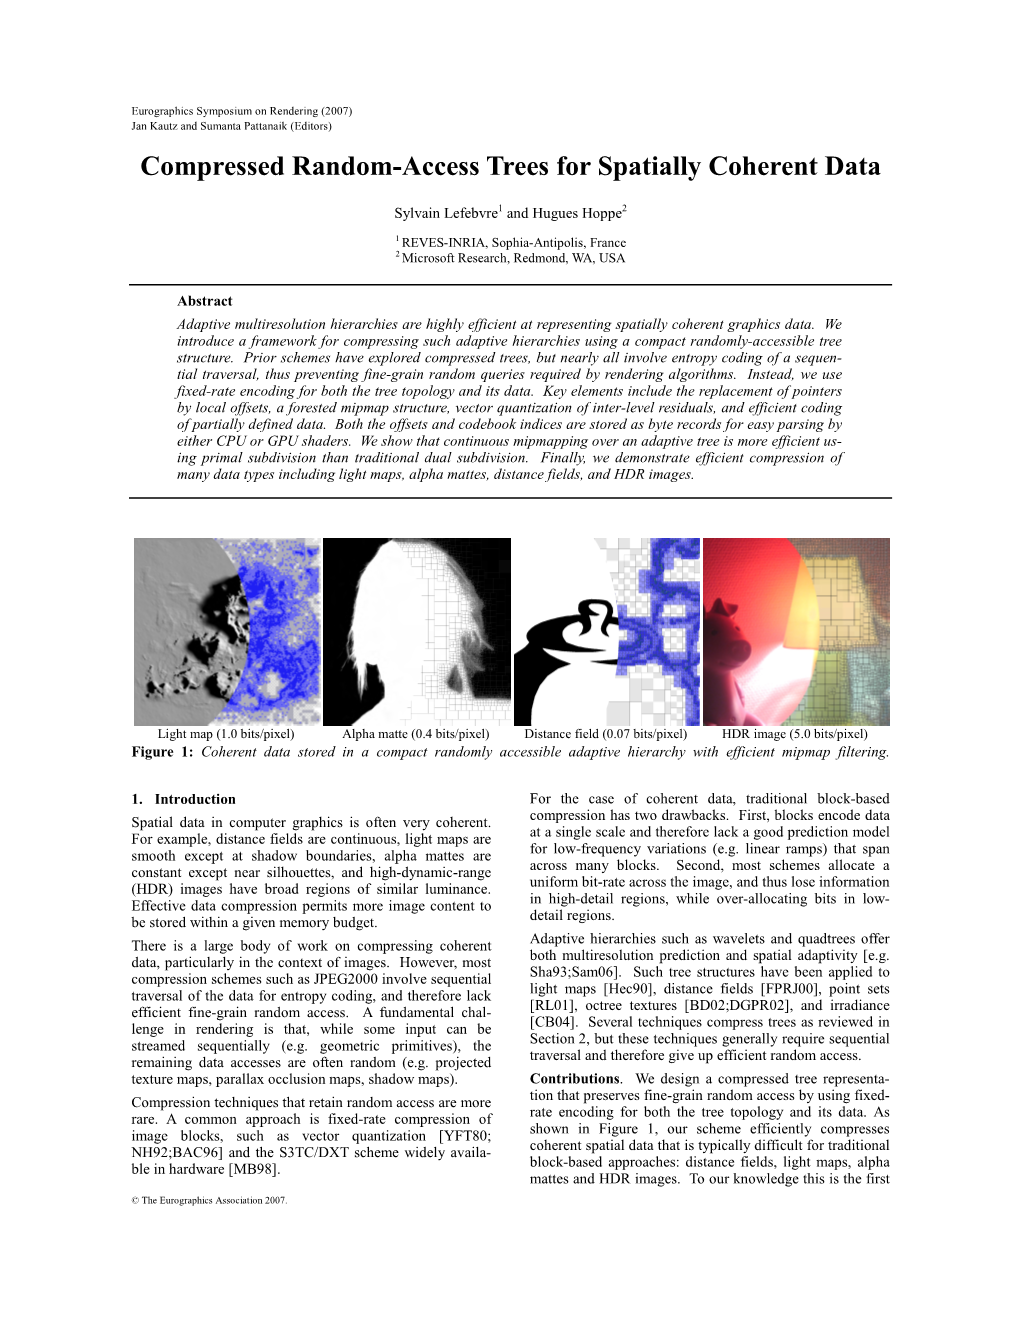 Compressed Random-Access Trees for Spatially Coherent Data